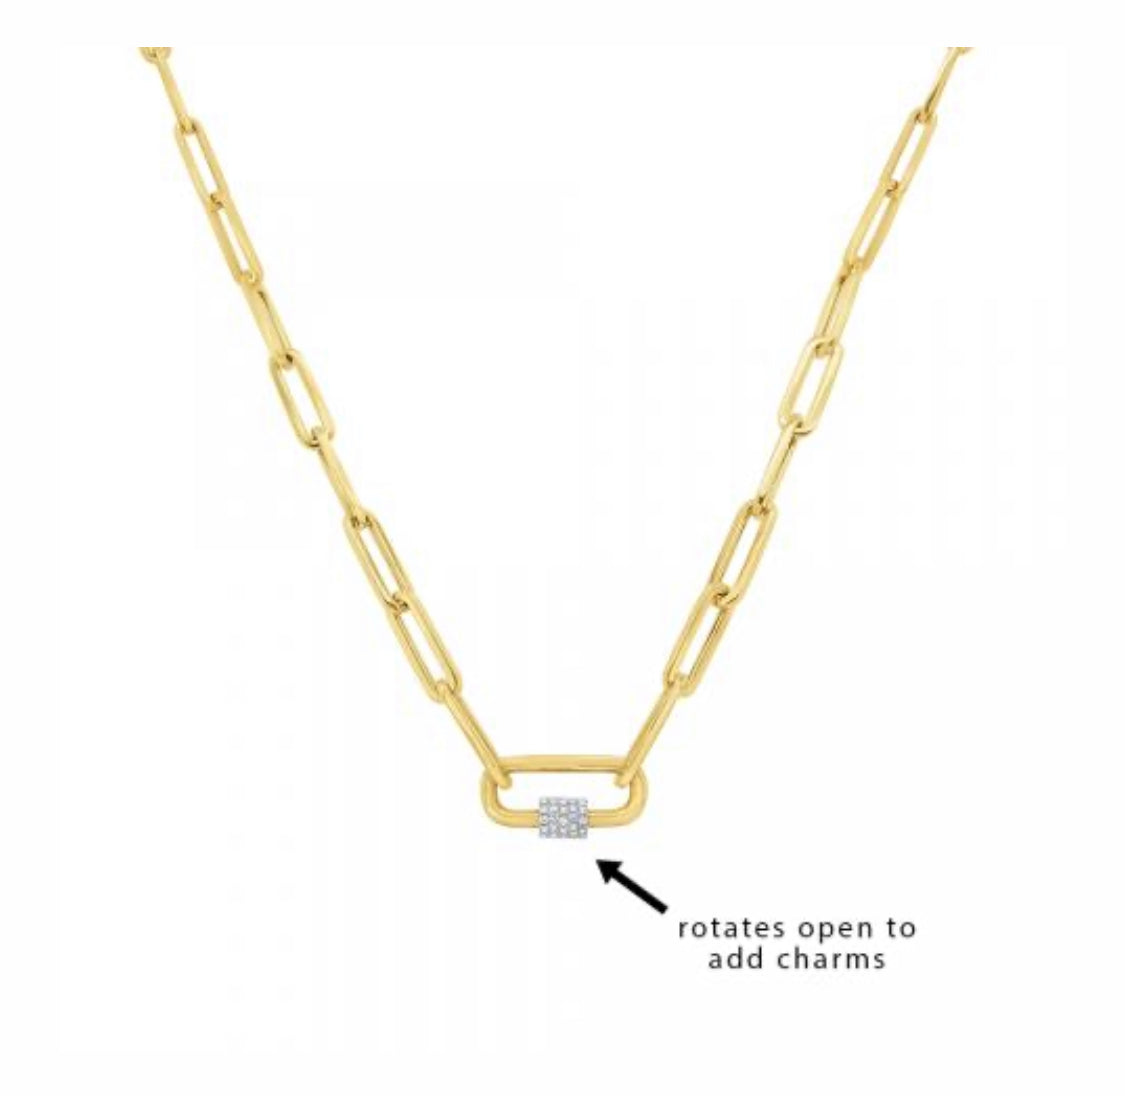 Heavy Weight Paperclip Chain with Charm Holder